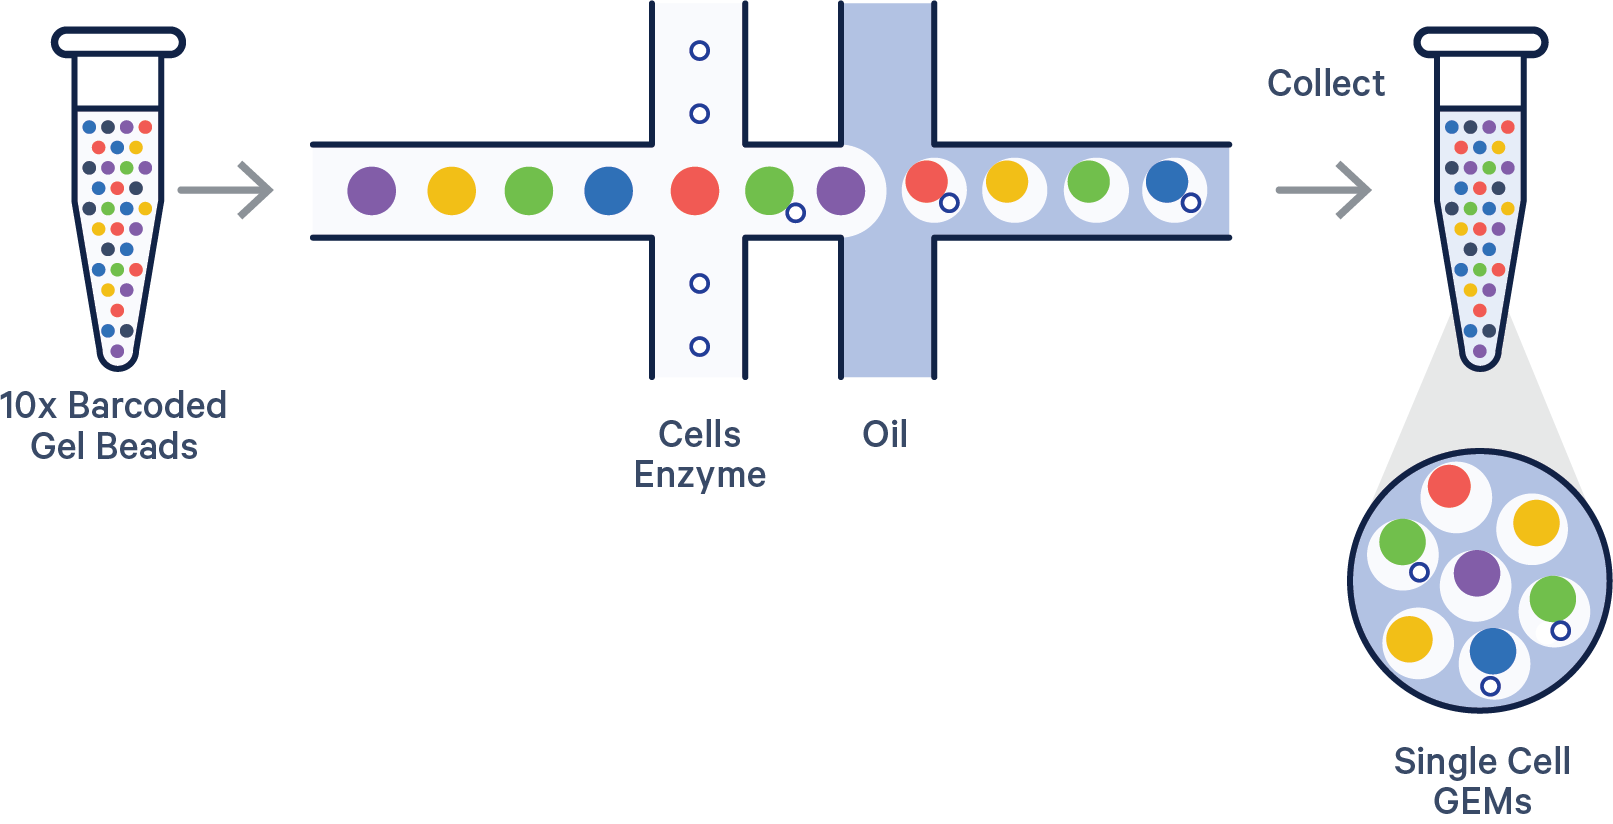 Figure 1. A schematic overview of GEM generation and barcoding with the GEM-X chip workflow. GEMs are generated by combining barcoded Gel Beads, a master mix containing cells, and partitioning oil in a GEM-X 3' or 5’ Chip. To achieve single cell resolution, cells are delivered at a limiting dilution, such that the majority (~90–99%) of generated GEMs contain no cell, while the remainder largely contain a single cell.